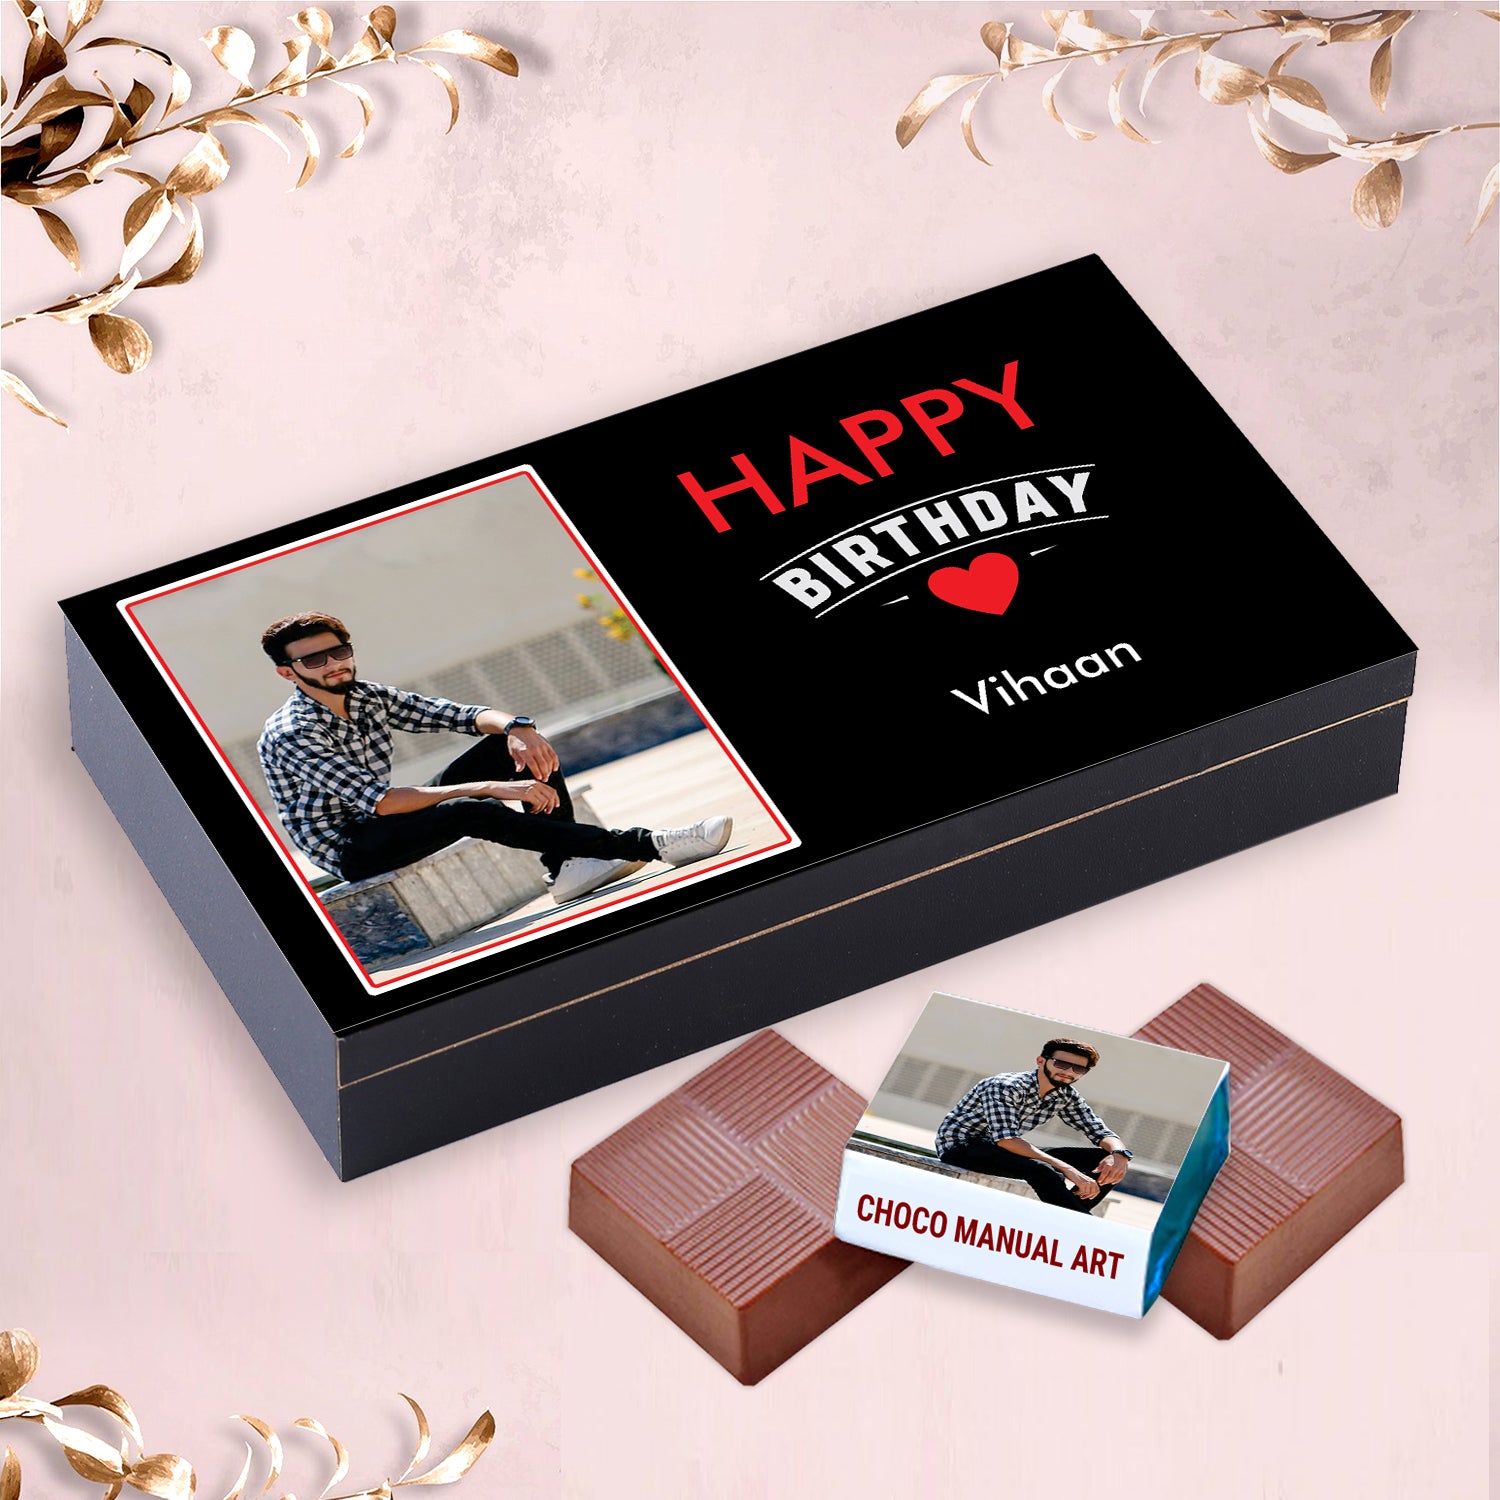  Best Friend Photo On Chocolate Box . Chocolate Box For Birthday Gift. Fruit and Nuts Chocolate In Box.